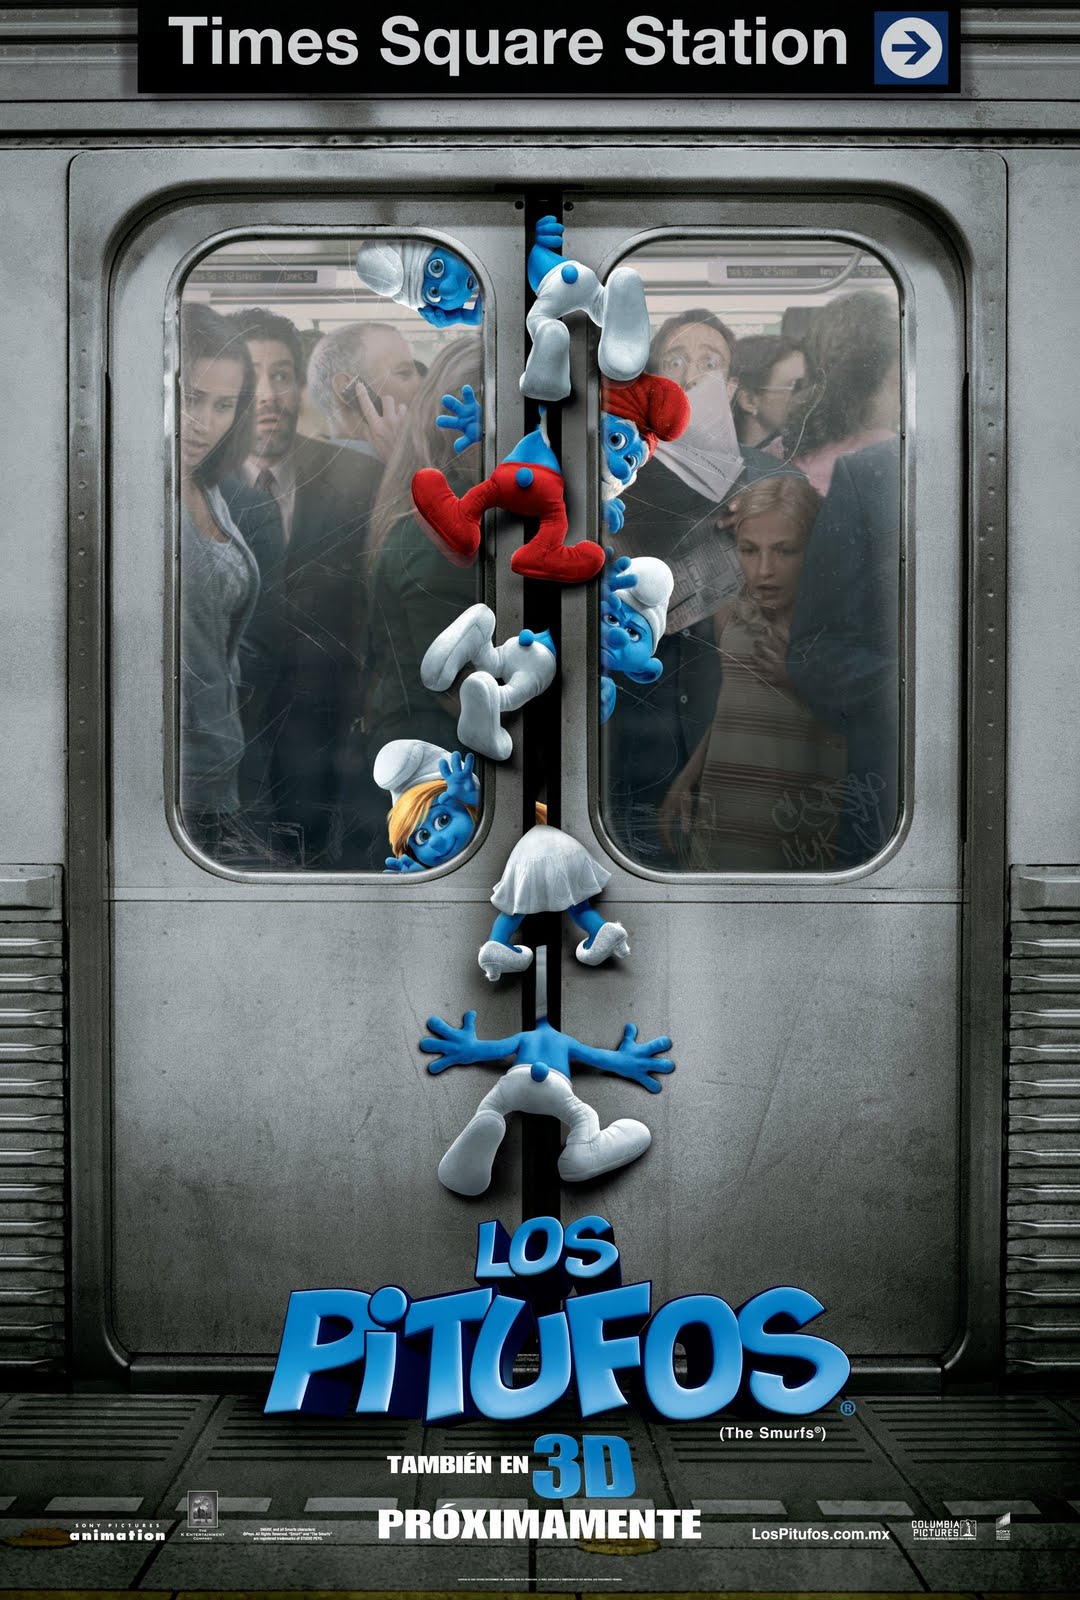 The Smurfs 3d Movie Poster Wallpaper High Resolution Background